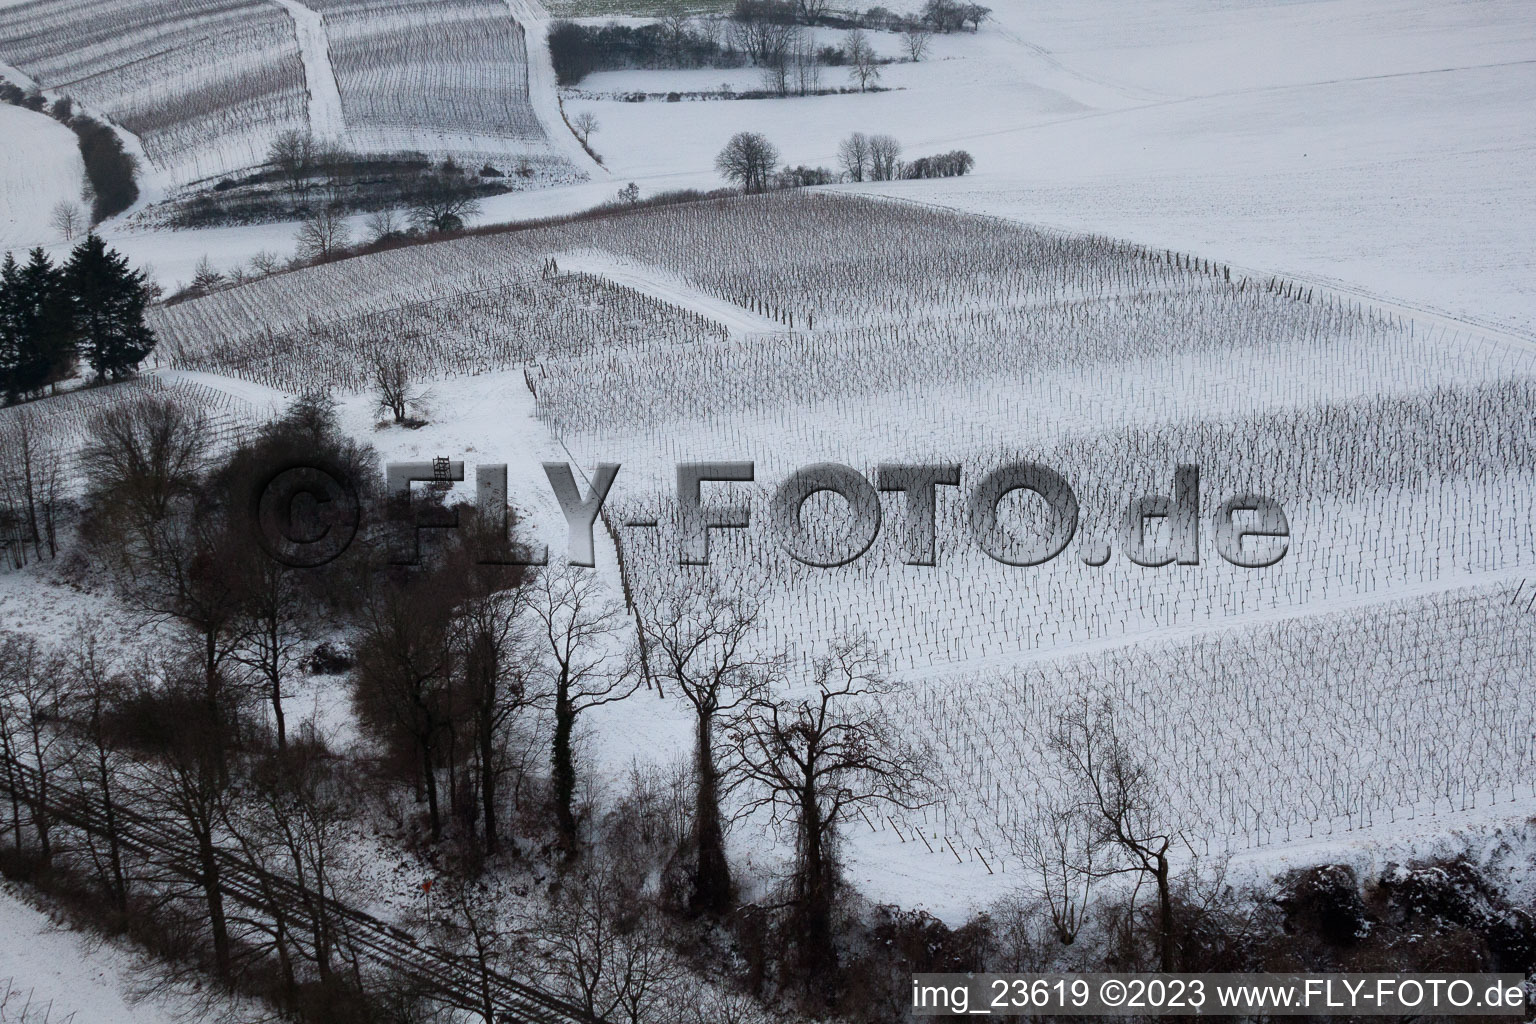 Aerial photograpy of Winter Wingert in Freckenfeld in the state Rhineland-Palatinate, Germany